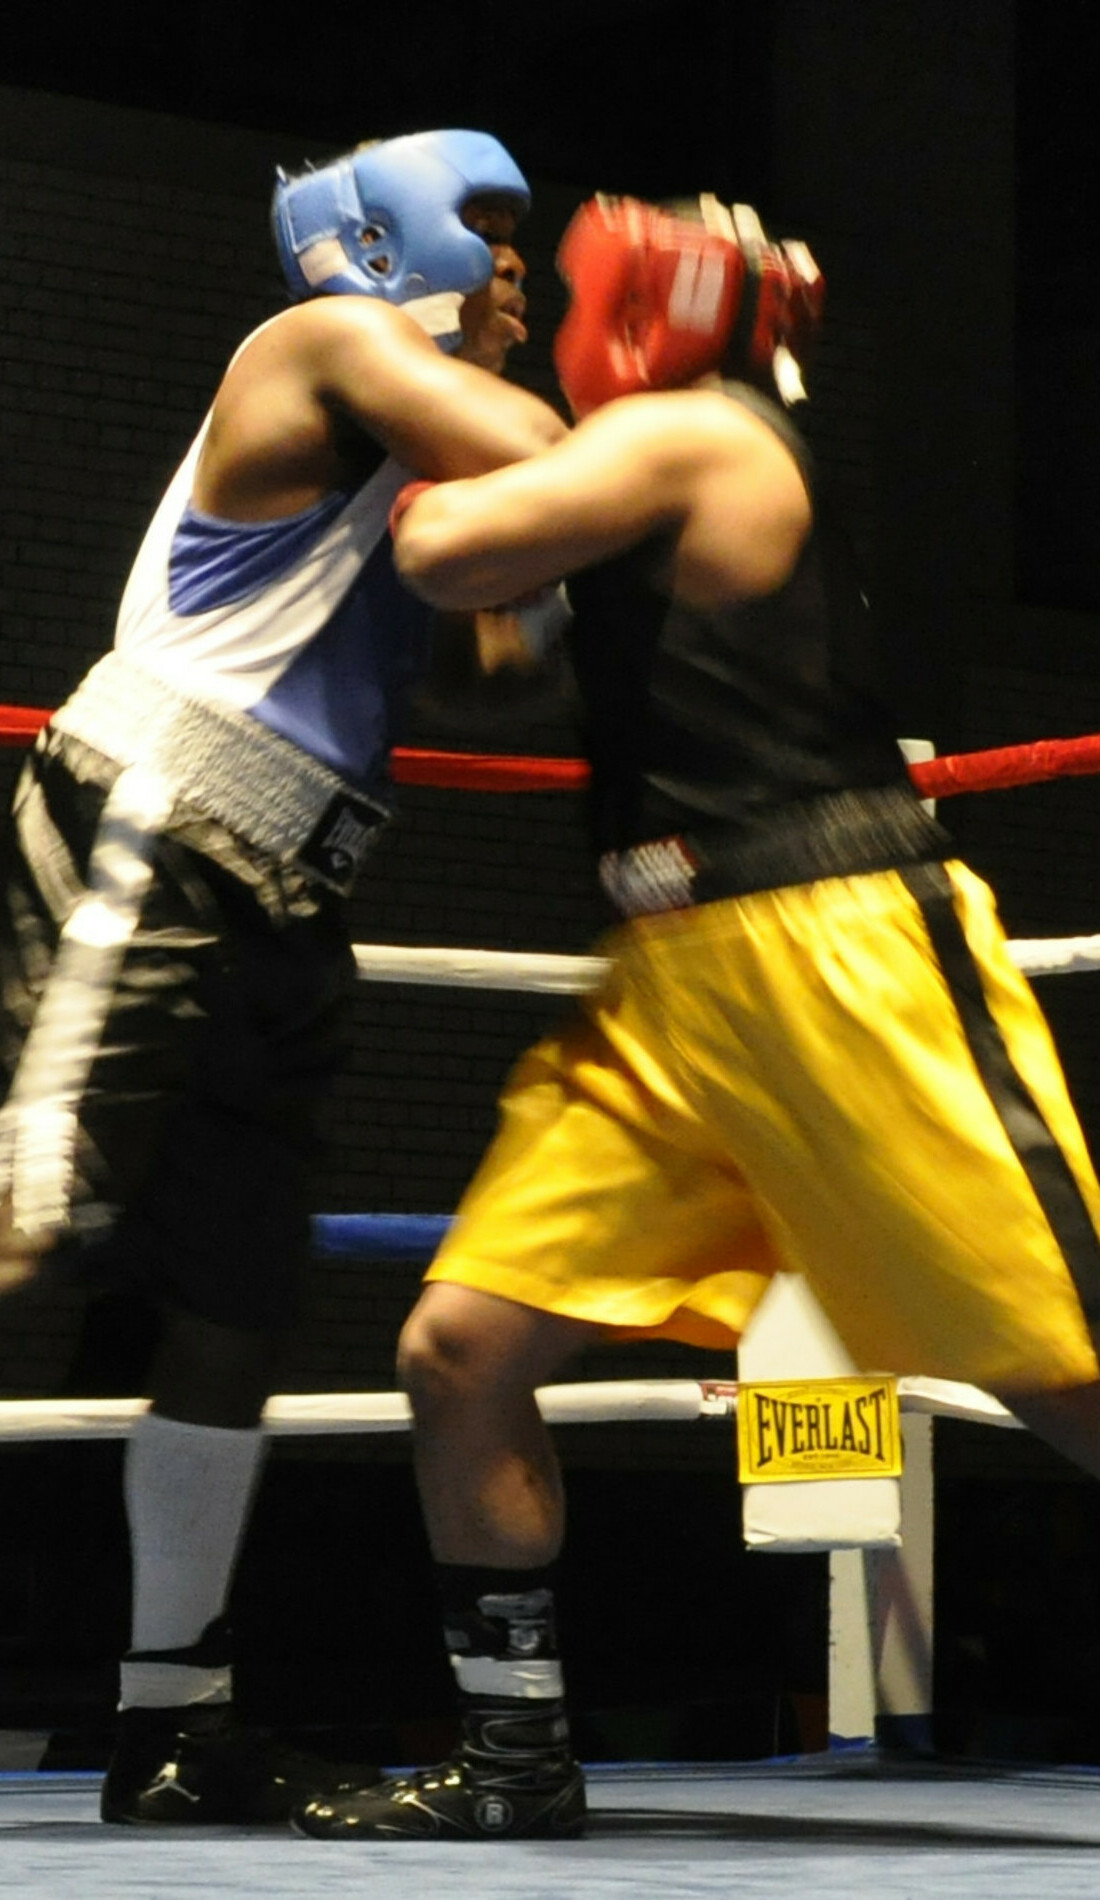 A Professional Boxing live event